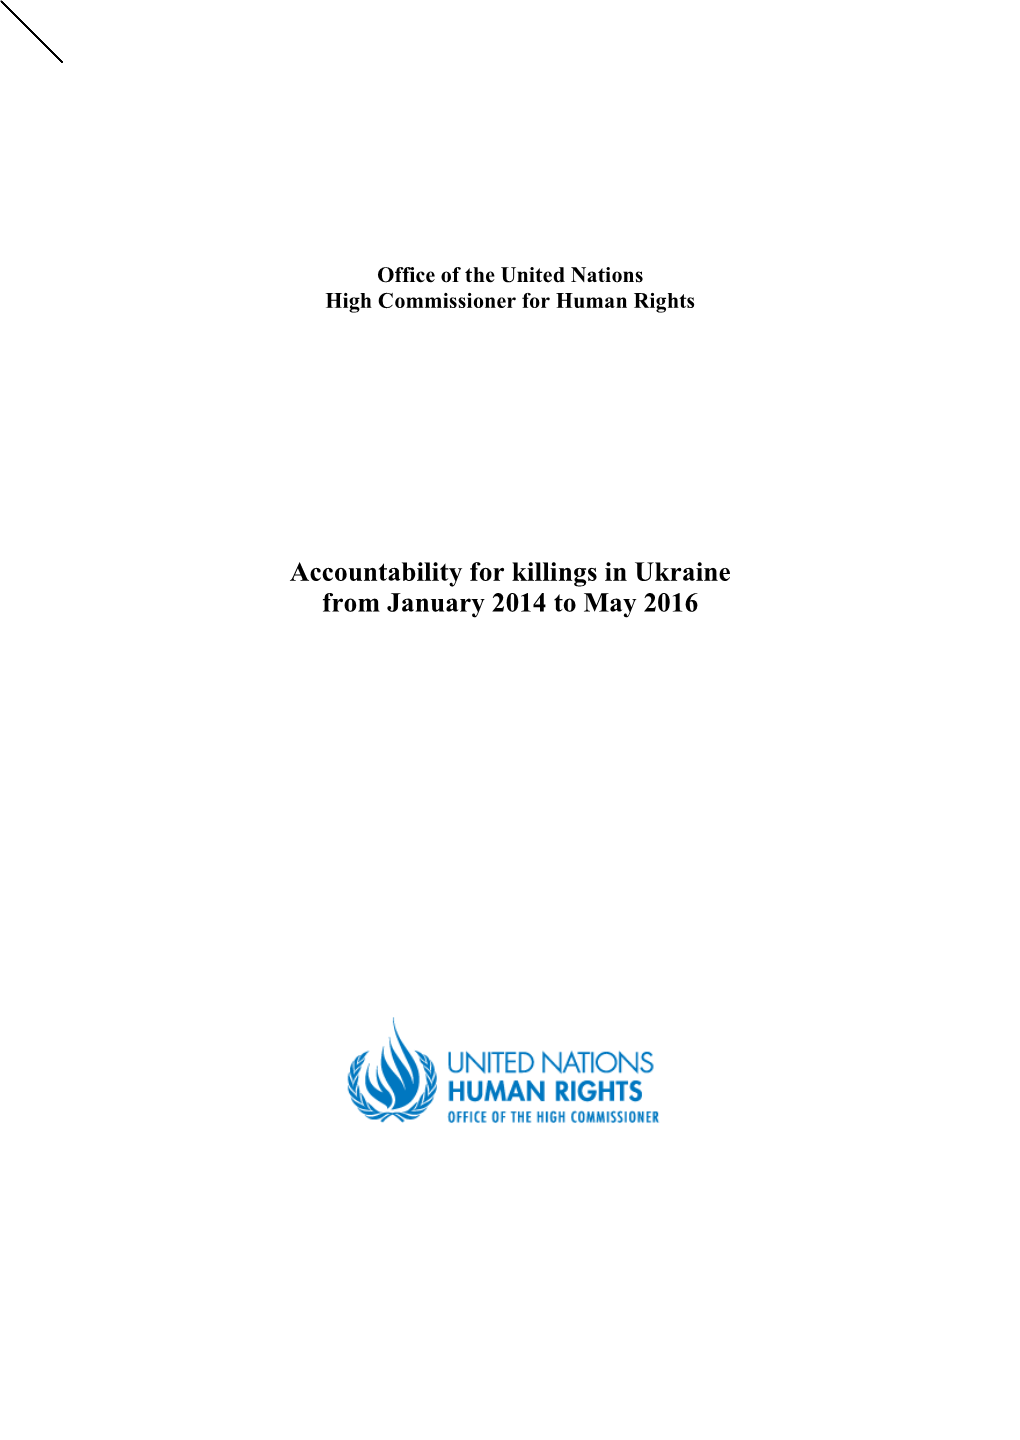 Accountability for Killings in Ukraine from January 2014 to May 2016 Contents